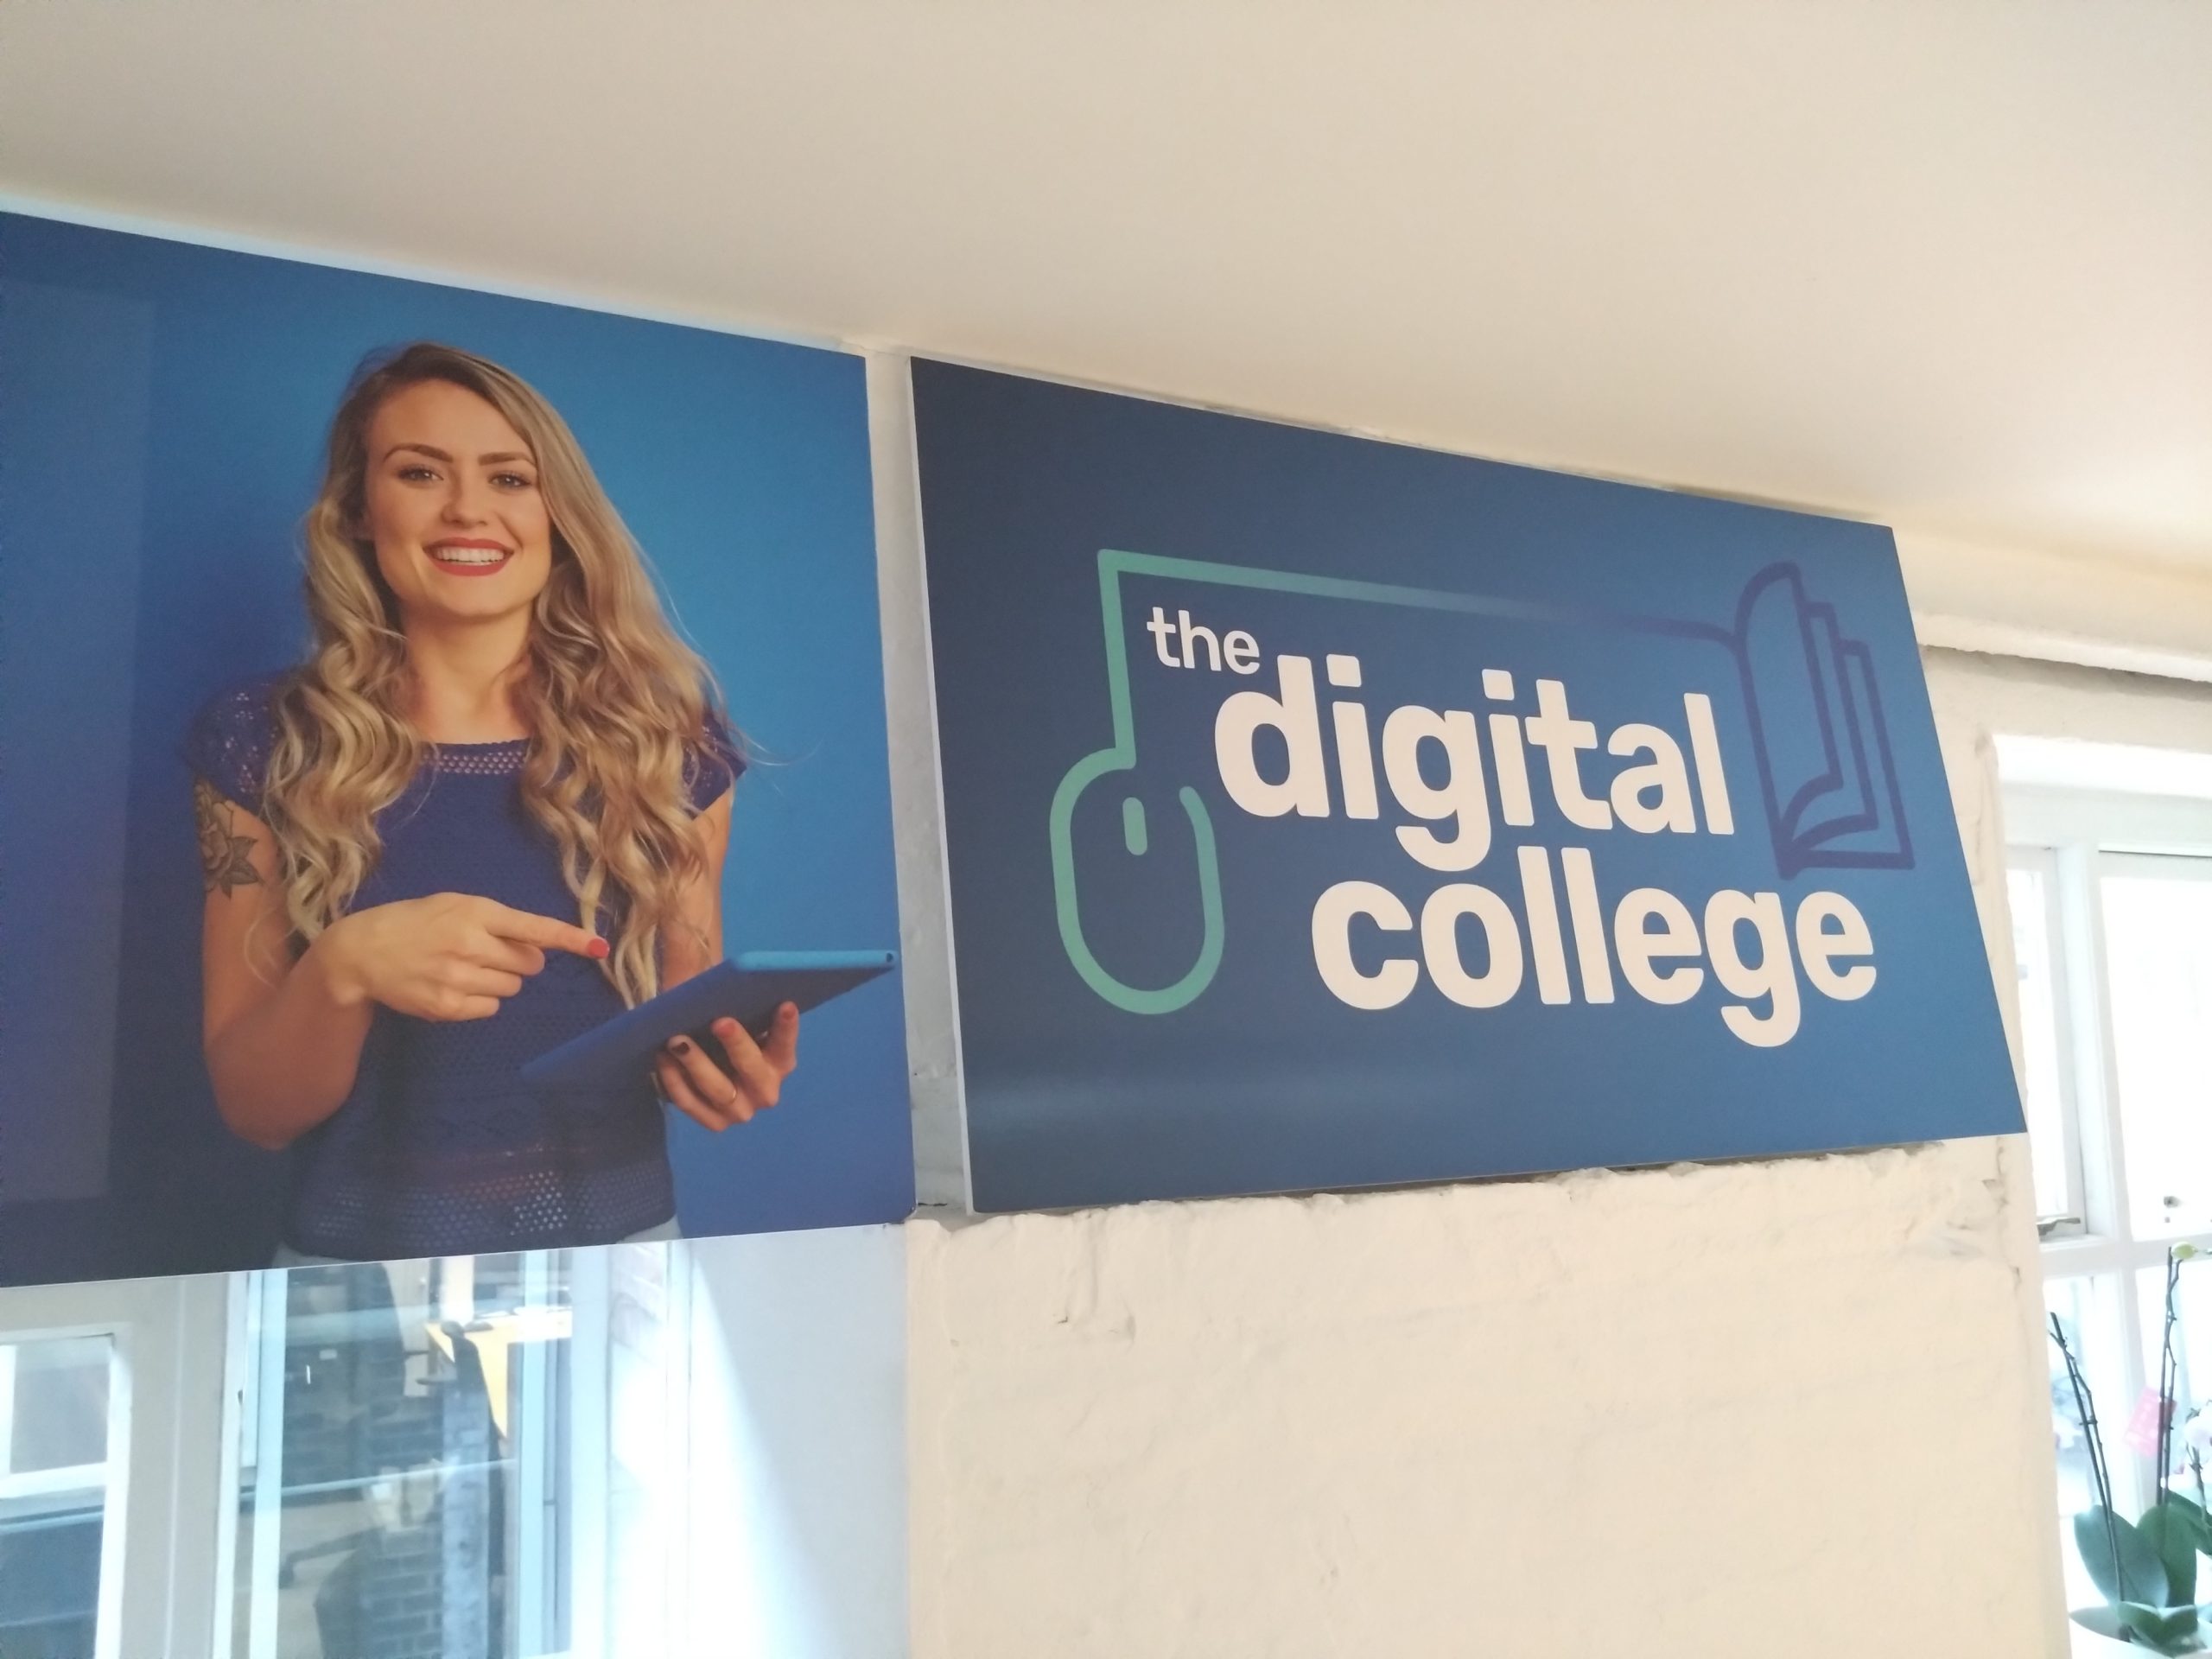 Online training specialist The Digital College has launched a Mental Health First Aider course students can study on the go or at home, achieving a recognized Level 2 qualification